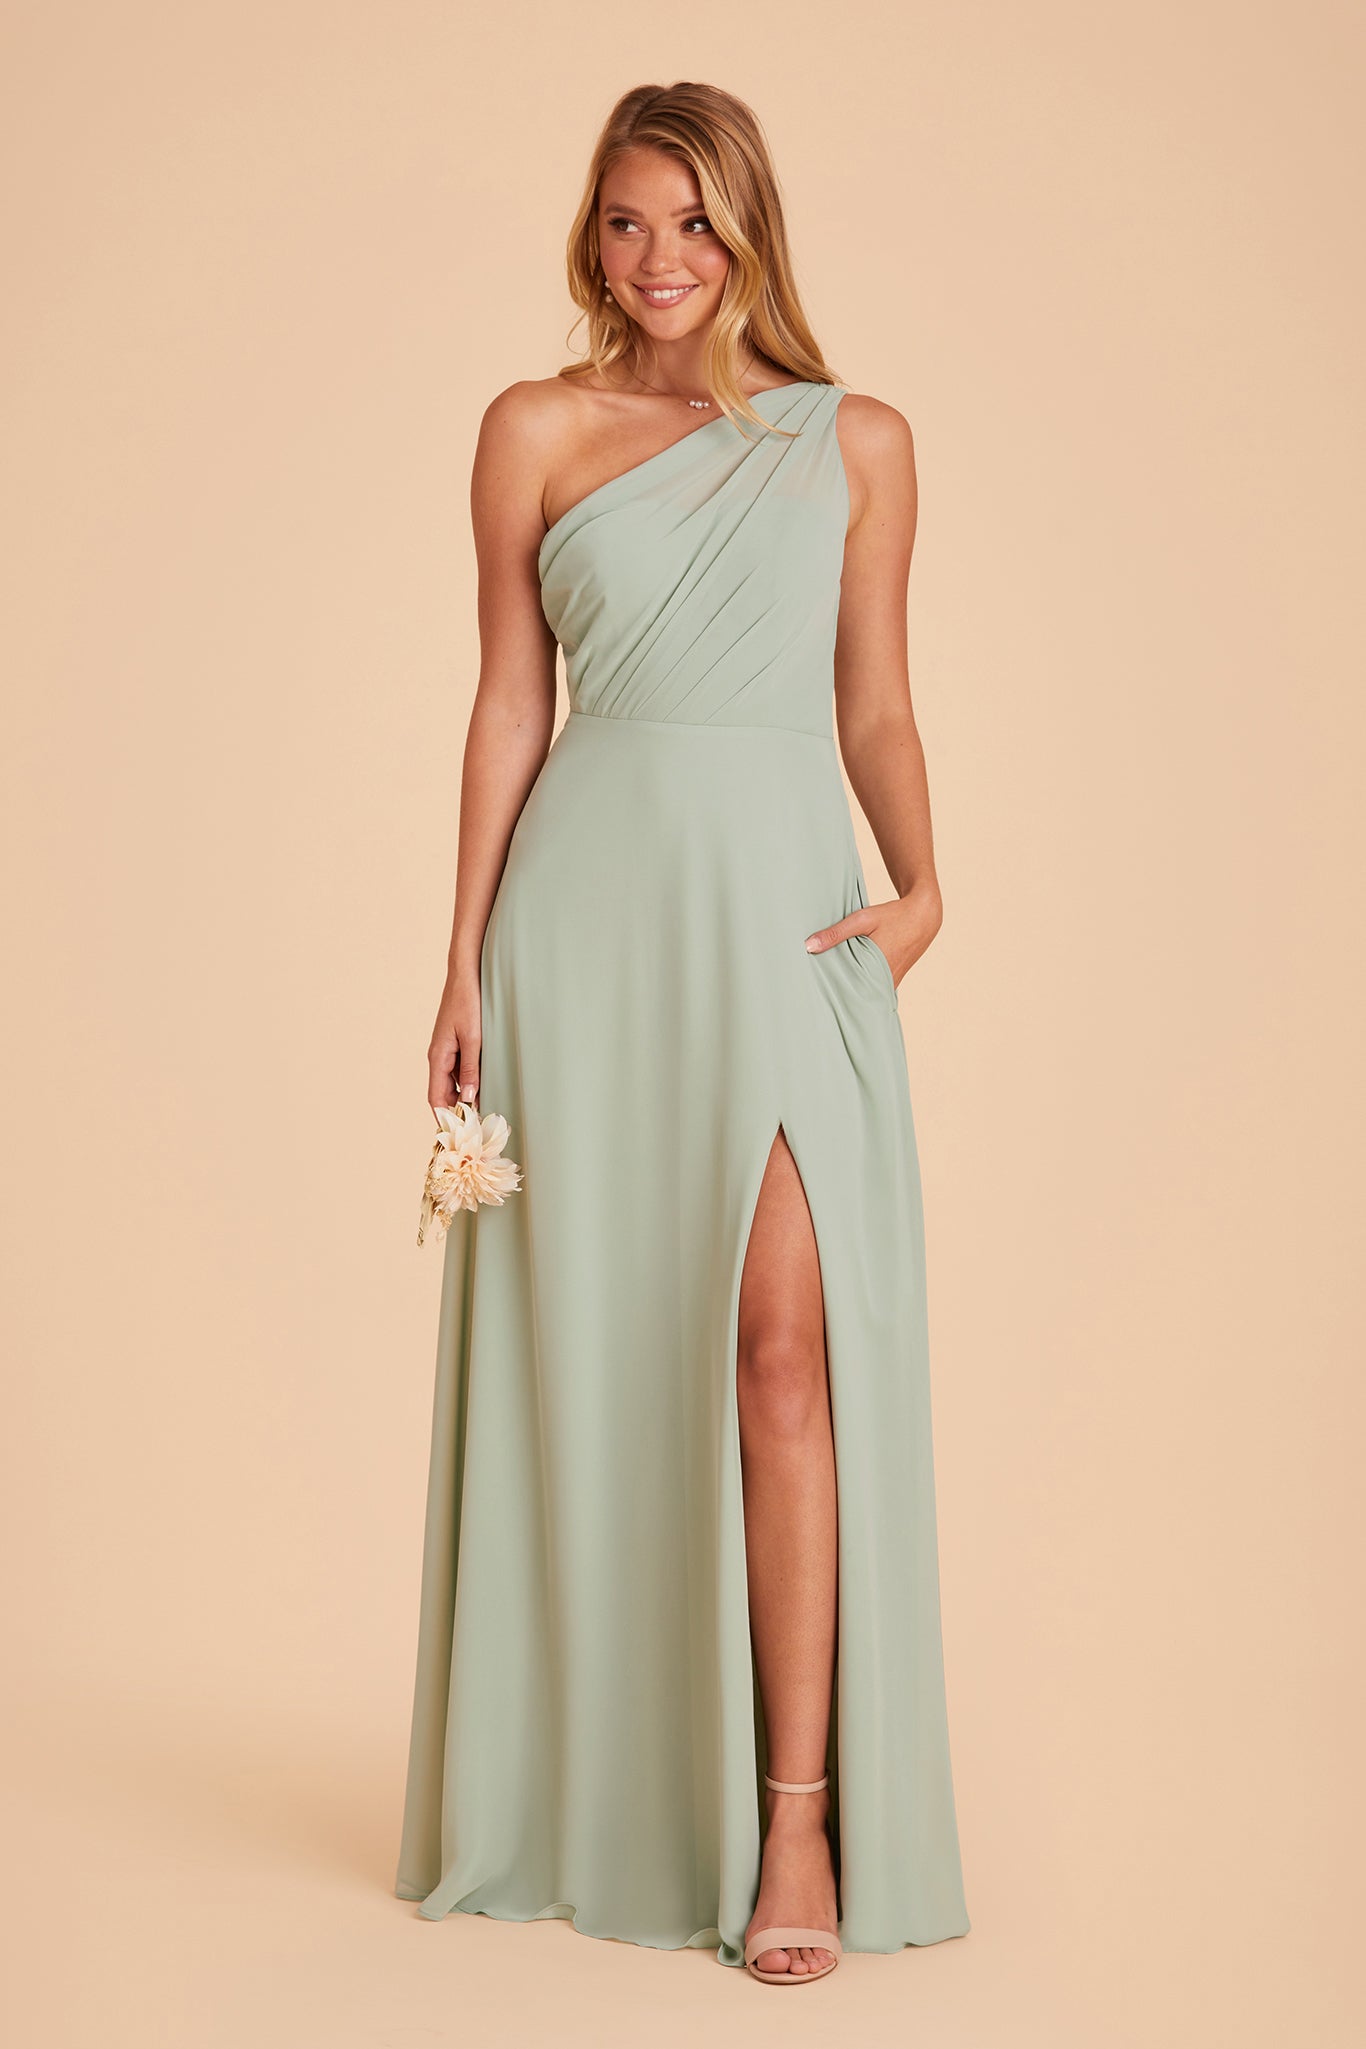 Front view of the Kira Dress in sage chiffon with the optional slit shows a slender model with a light skin tone wearing an asymmetrical one-shoulder, full-length dress. Soft pleating gathers at the left shoulder of the bodice with a smooth fit at the waist as the dress flows to the floor. 